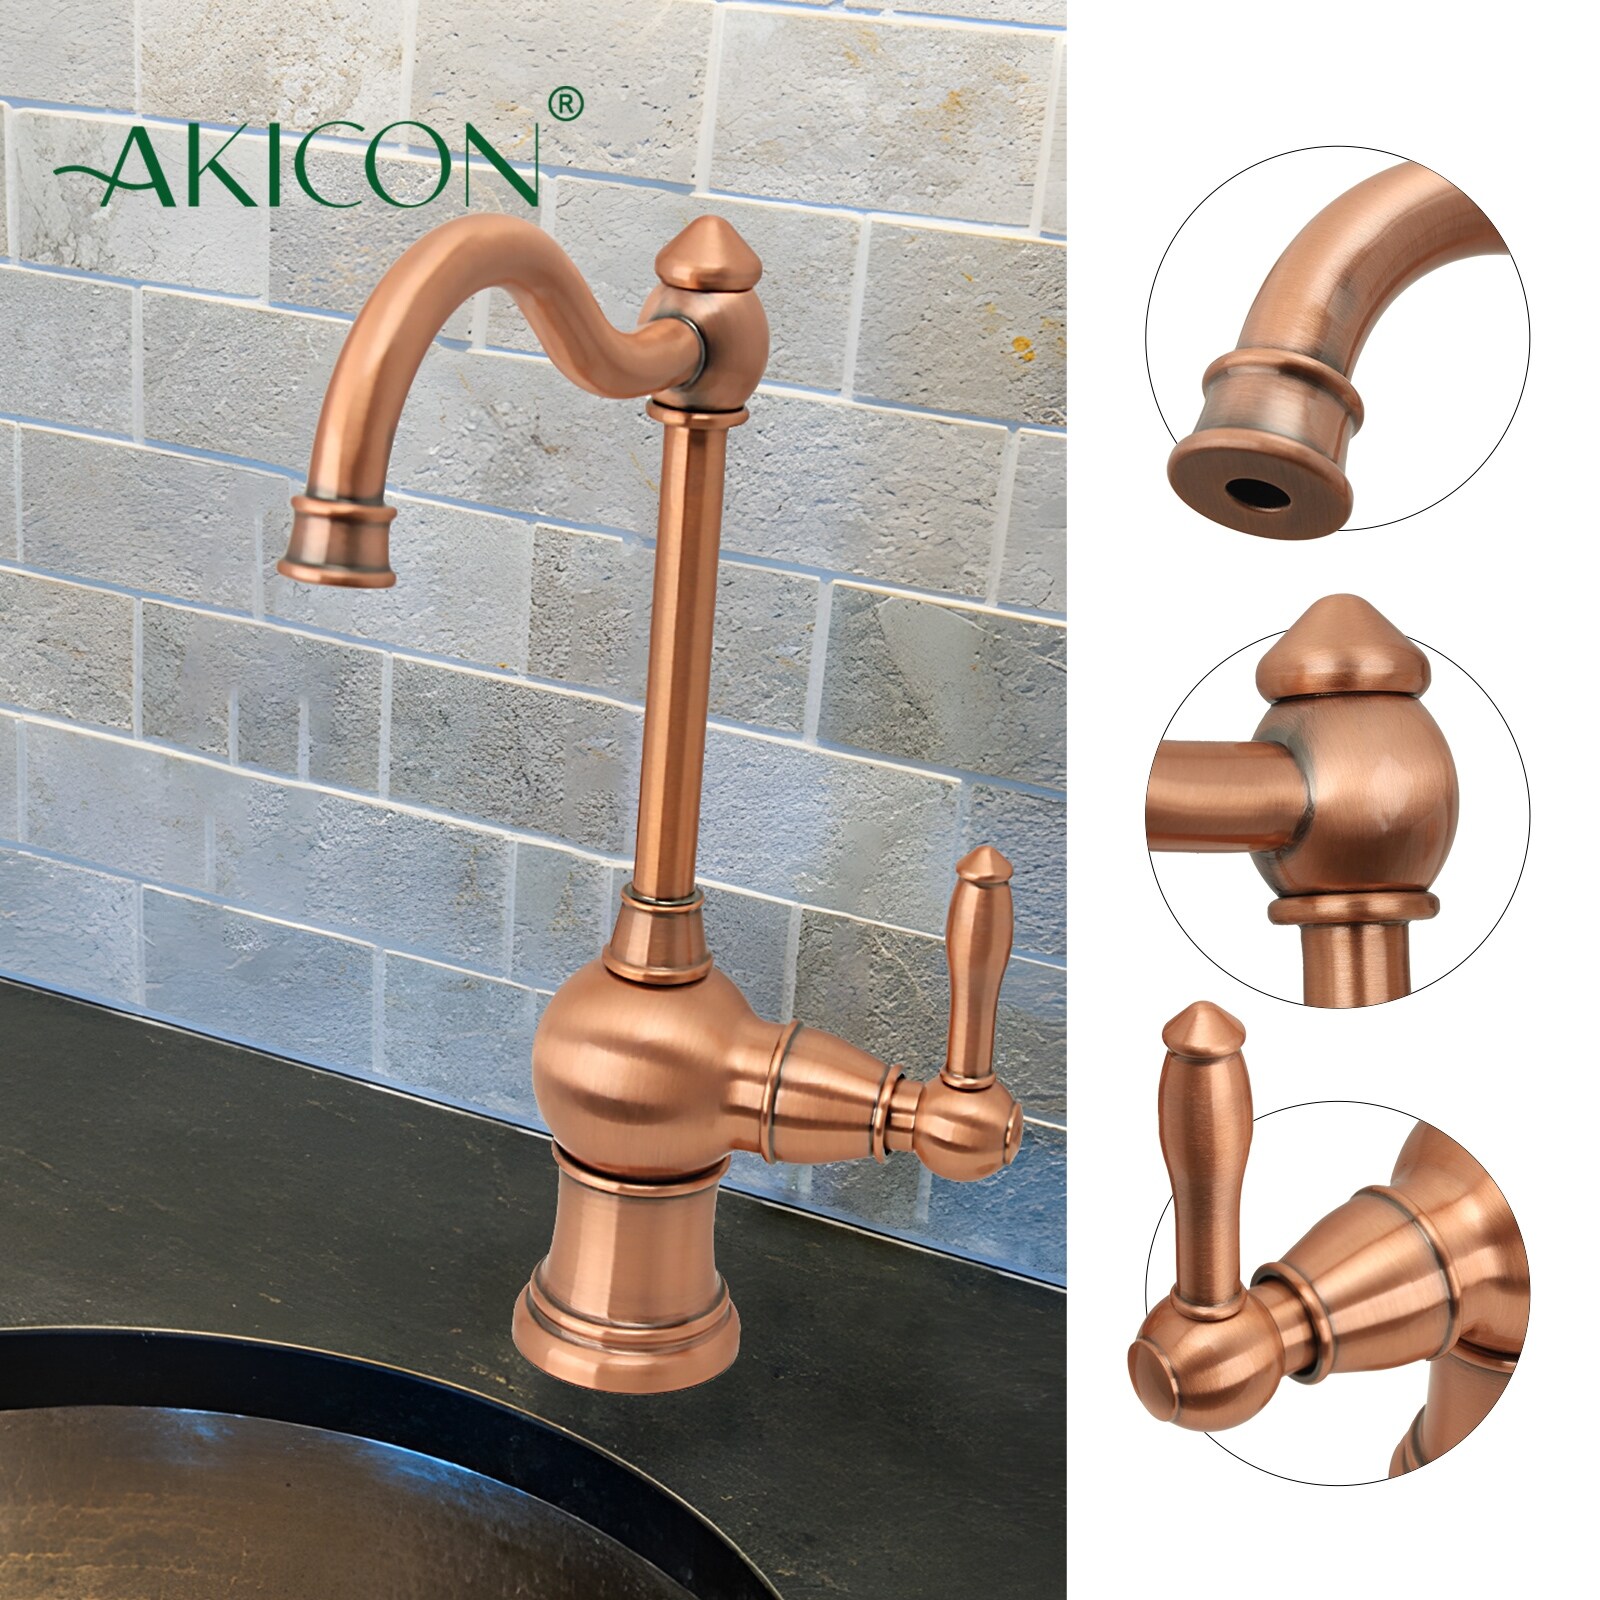 Copper Kitchen Water Filter Faucet in Non-Air Gap - 4.5"x 9.2"